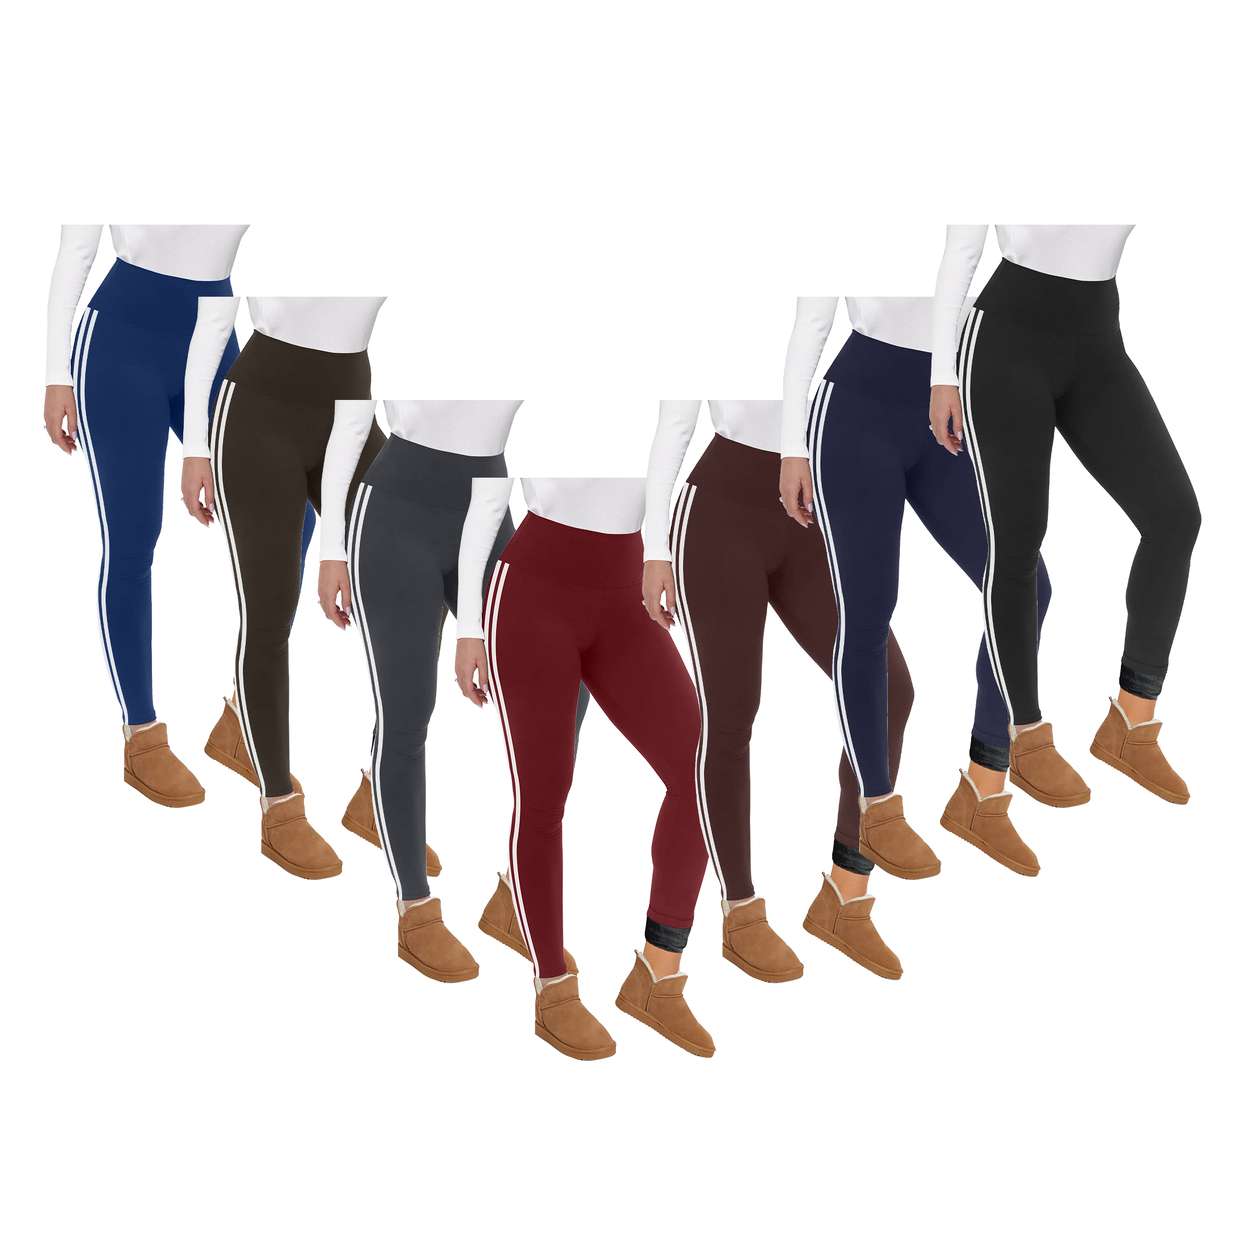 3-Pack: Women's Ultra Soft Winter Warm Cozy Striped Fur Lined Yoga Leggings - Assorted, Large